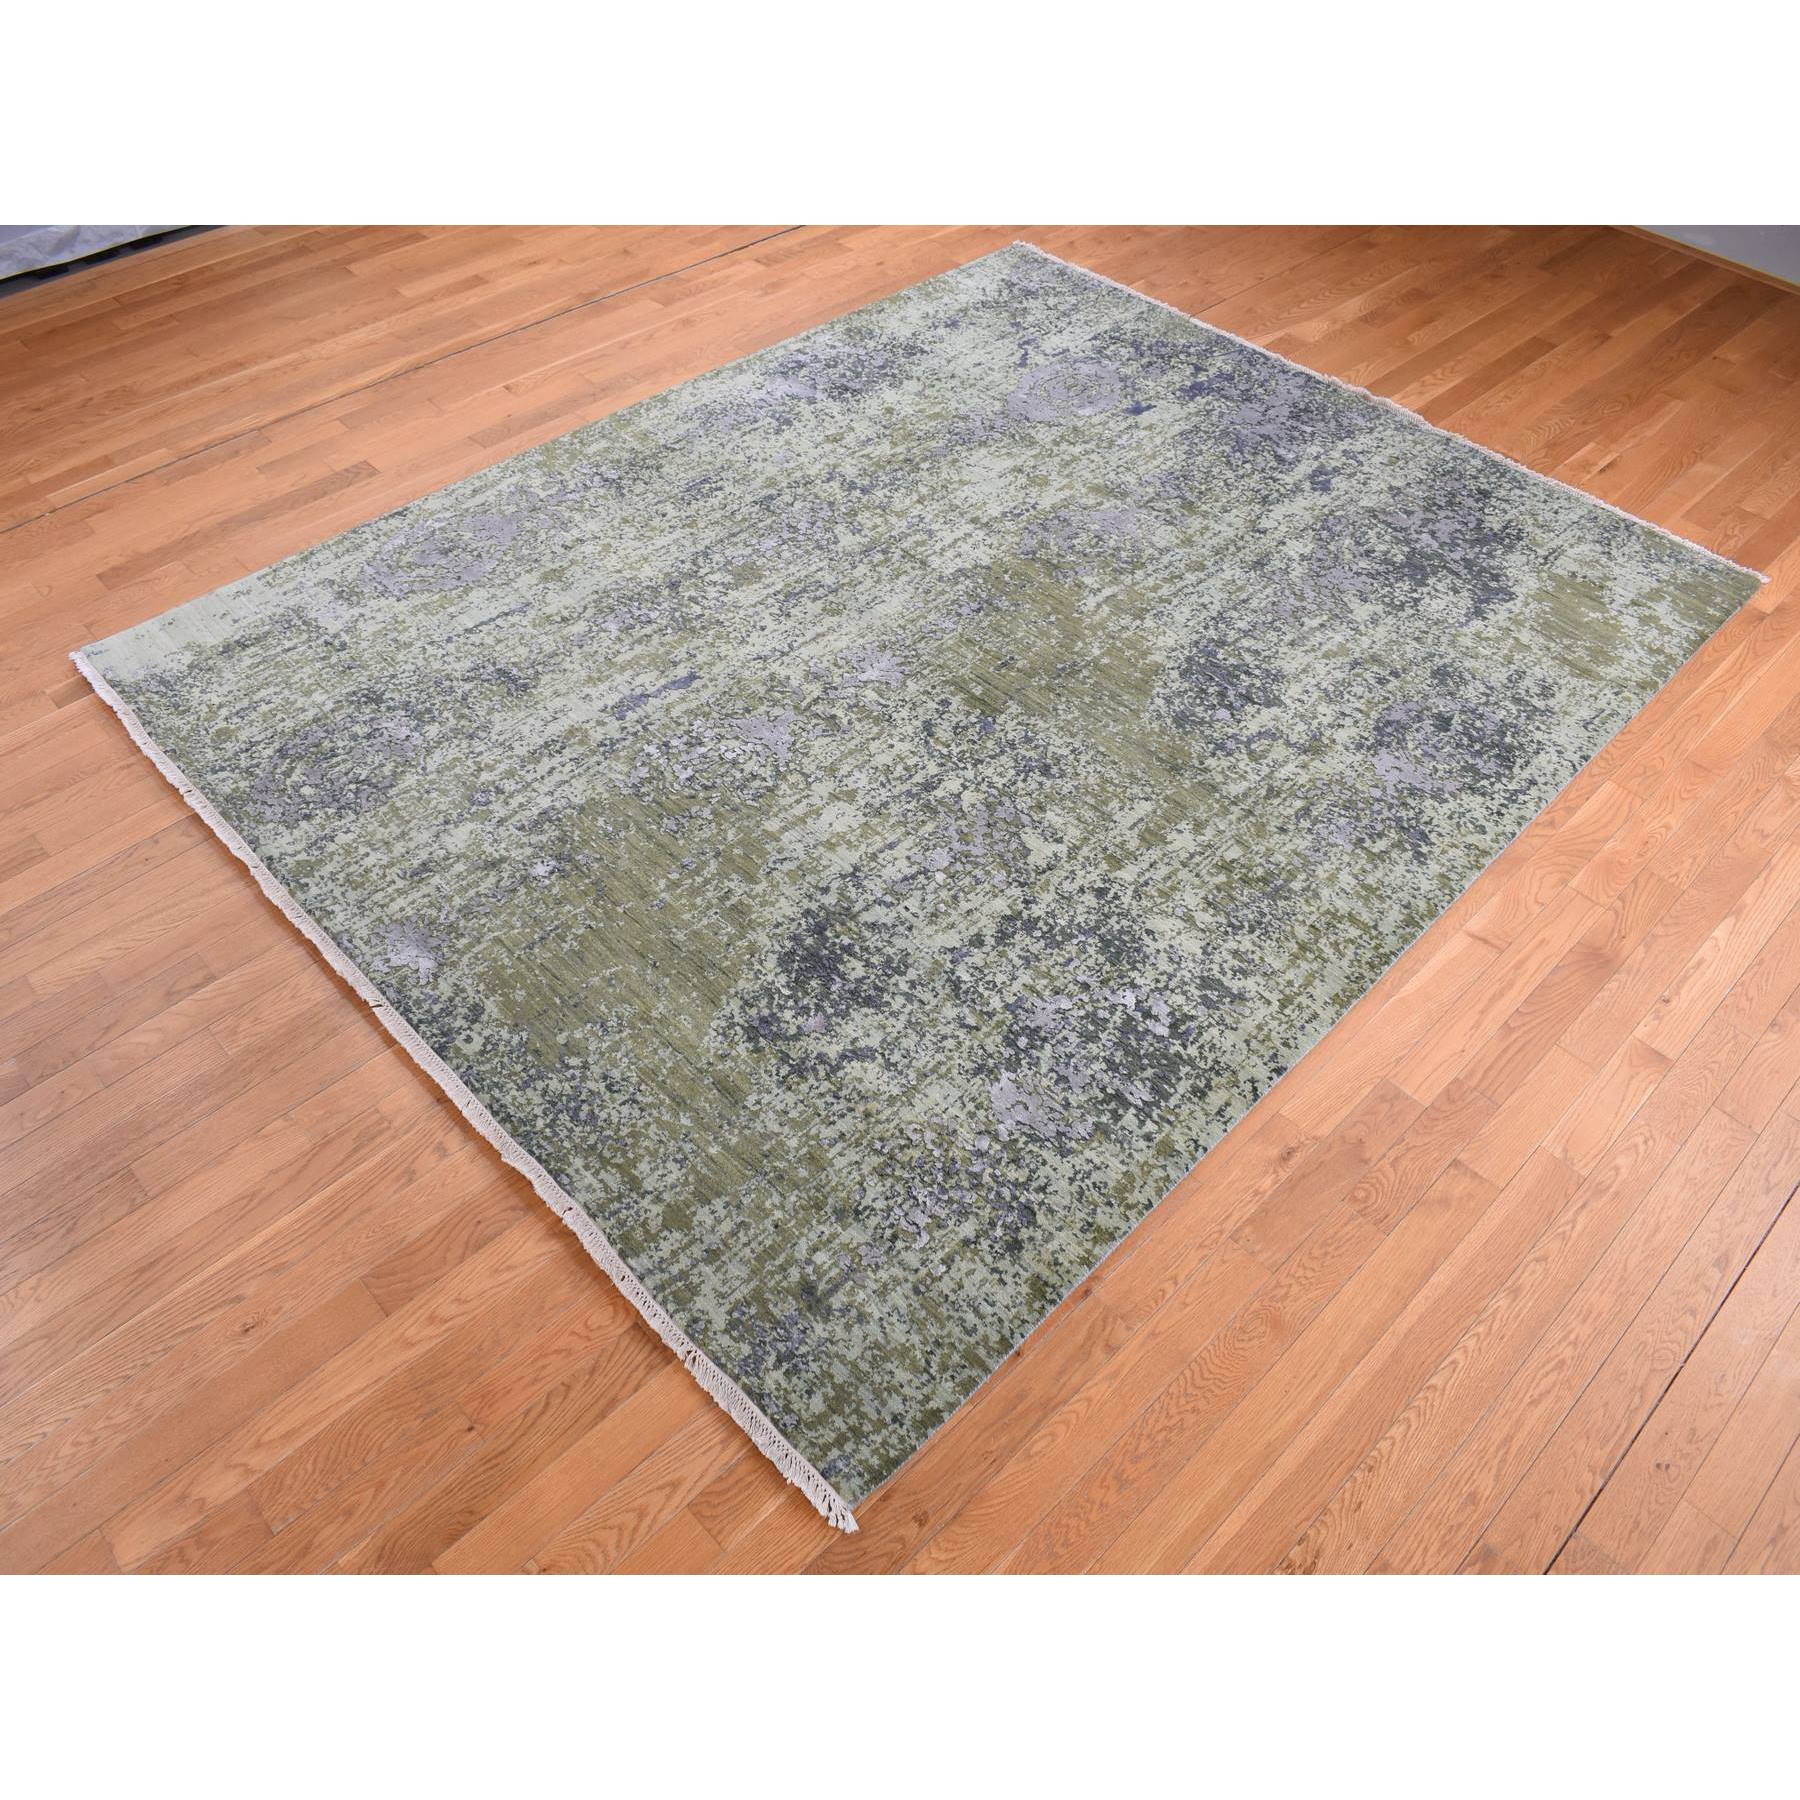  Silk Hand-Knotted Area Rug 8'1